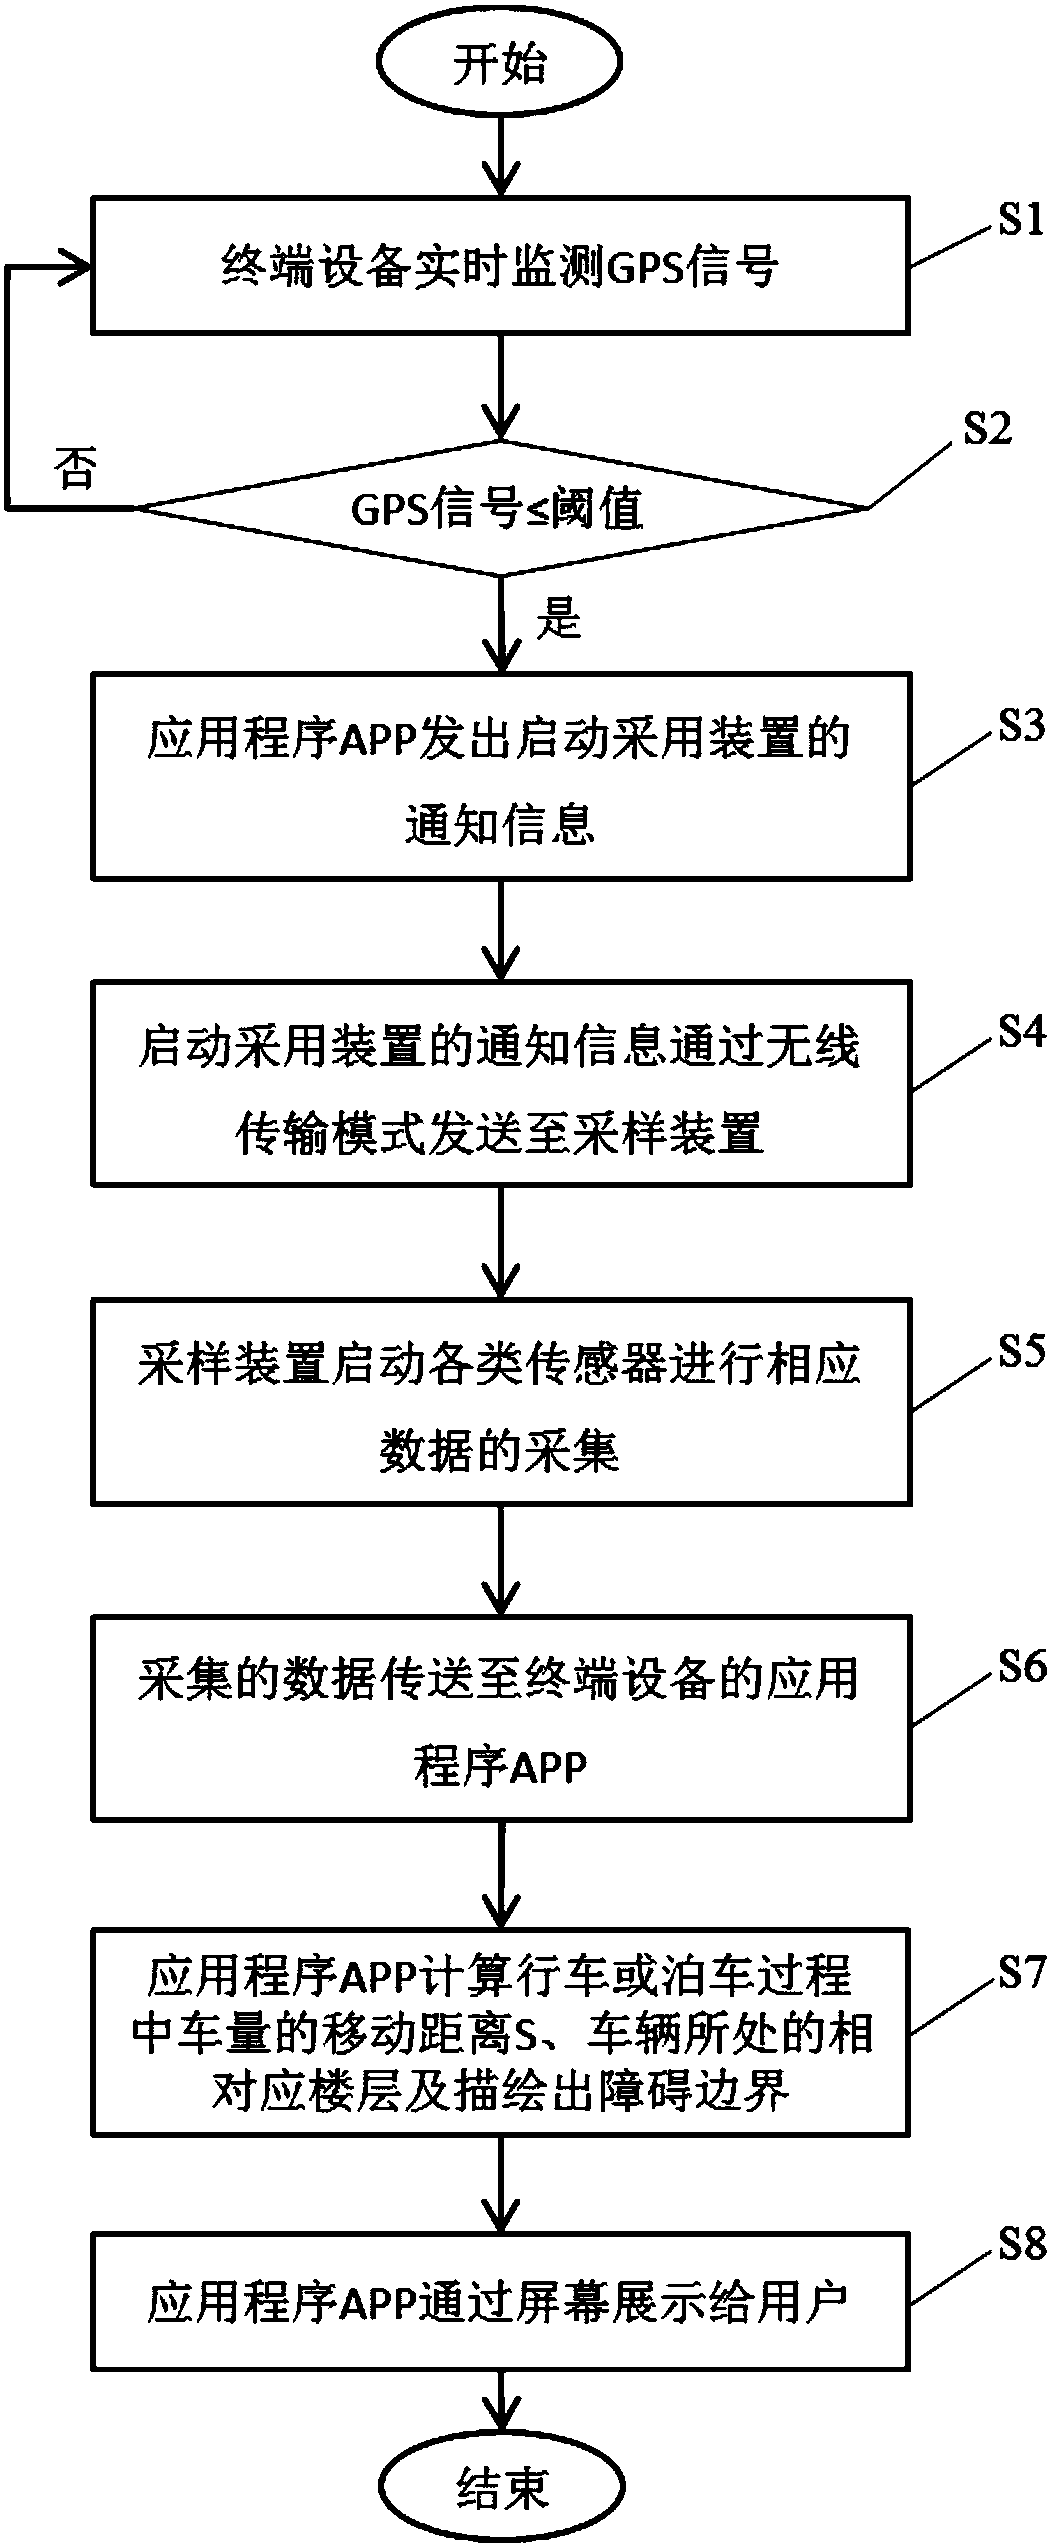 Indoor parking route finding system and method